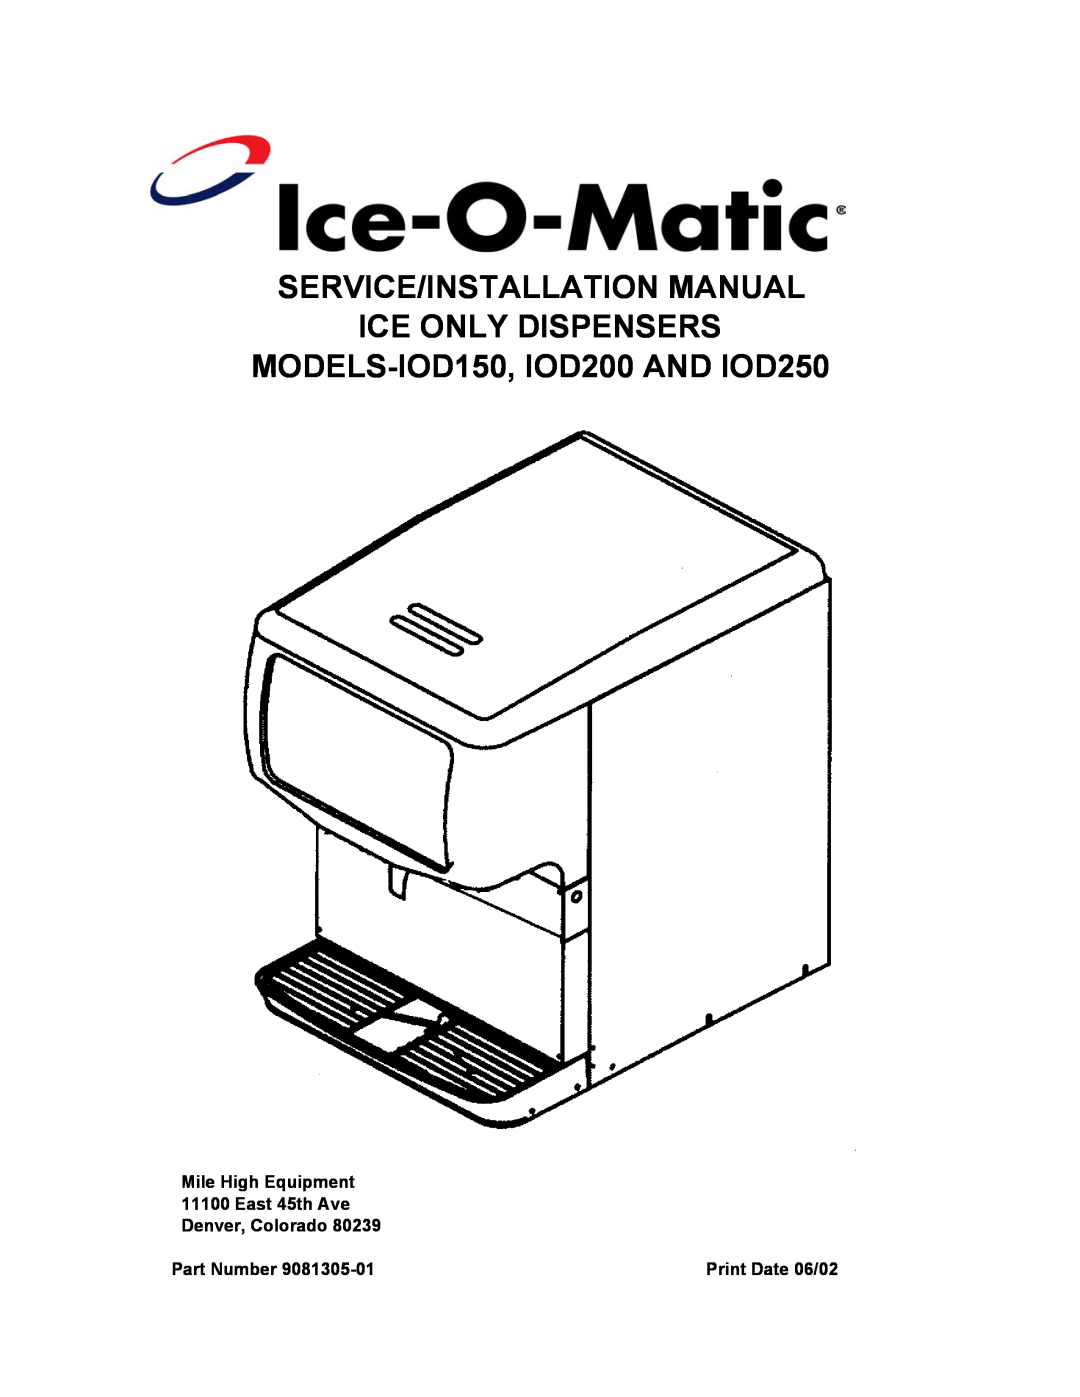 Ice-O-Matic installation manual Service/Installation Manual Ice Only Dispensers, MODELS-IOD150, IOD200 AND IOD250 